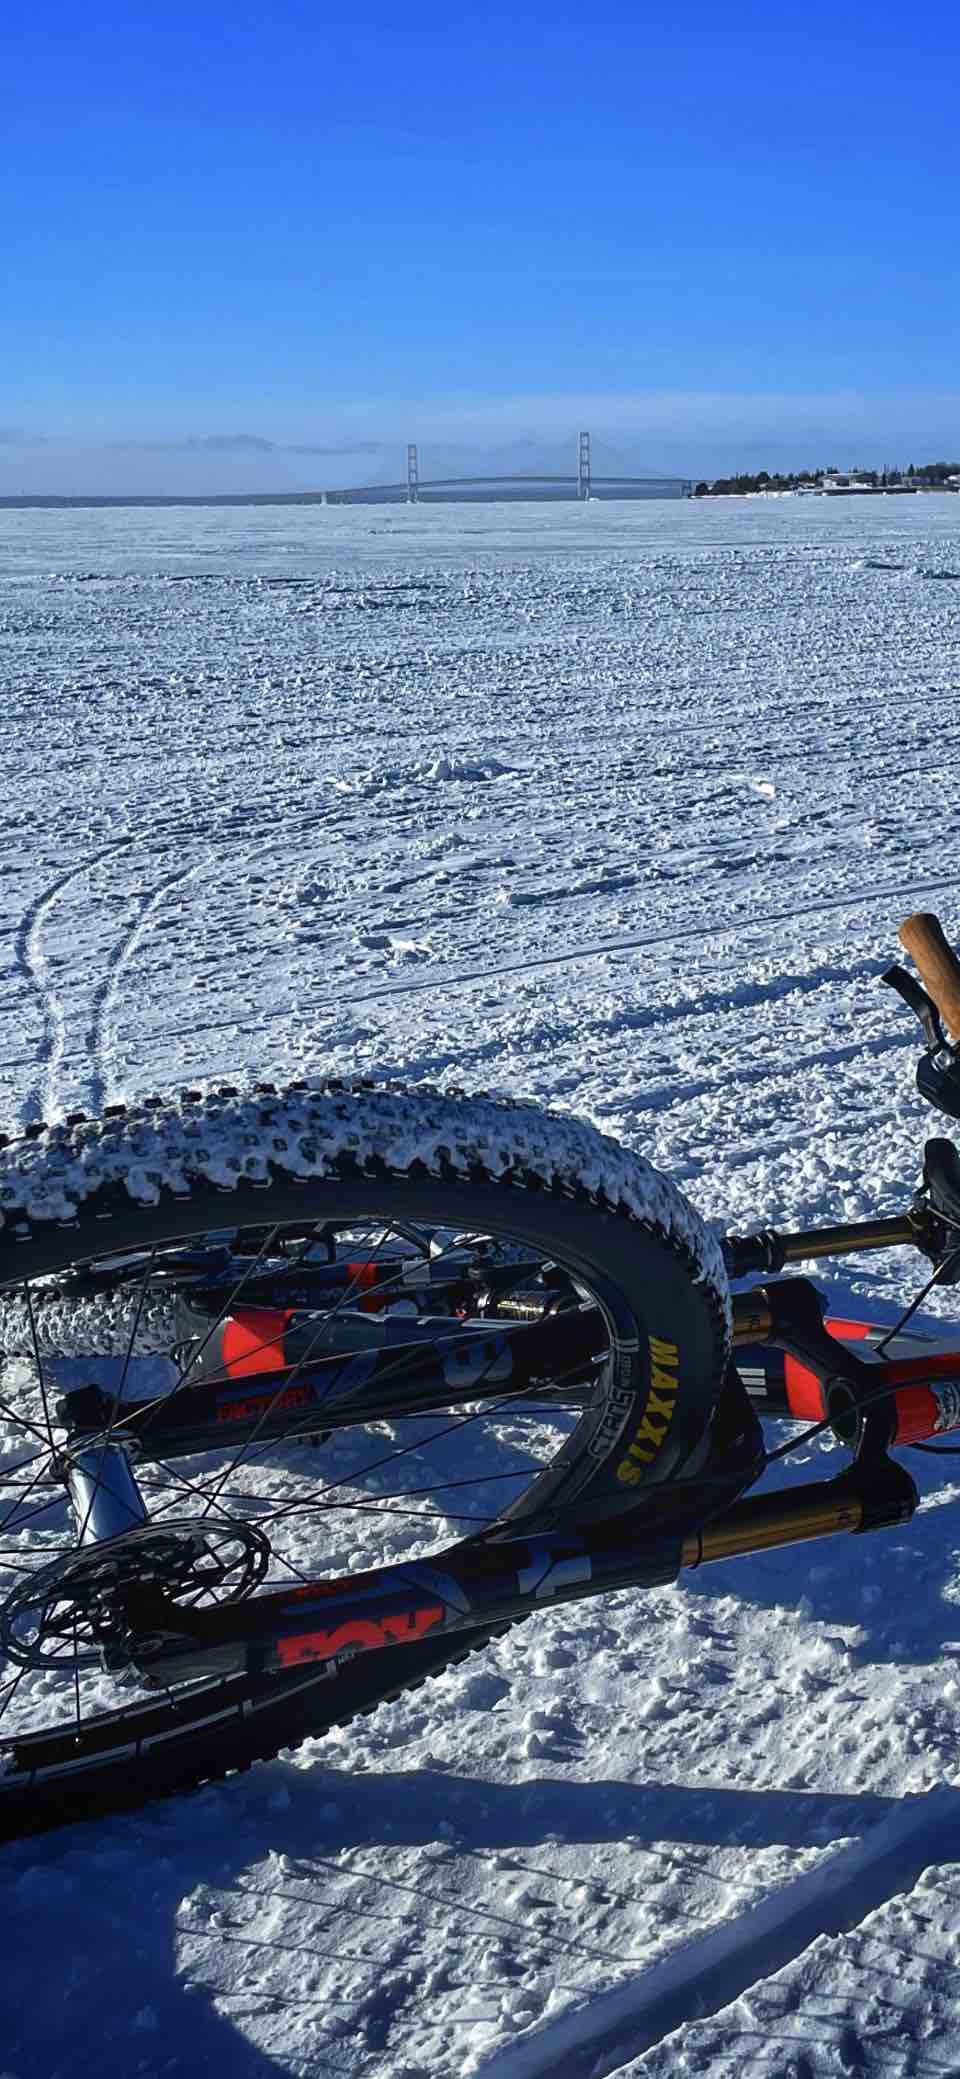 bikerumor pic of the day a mountain bike is lying on its side on an ice and snow covered expanse of water there is a bridge in the distance and the sky is clear and bright